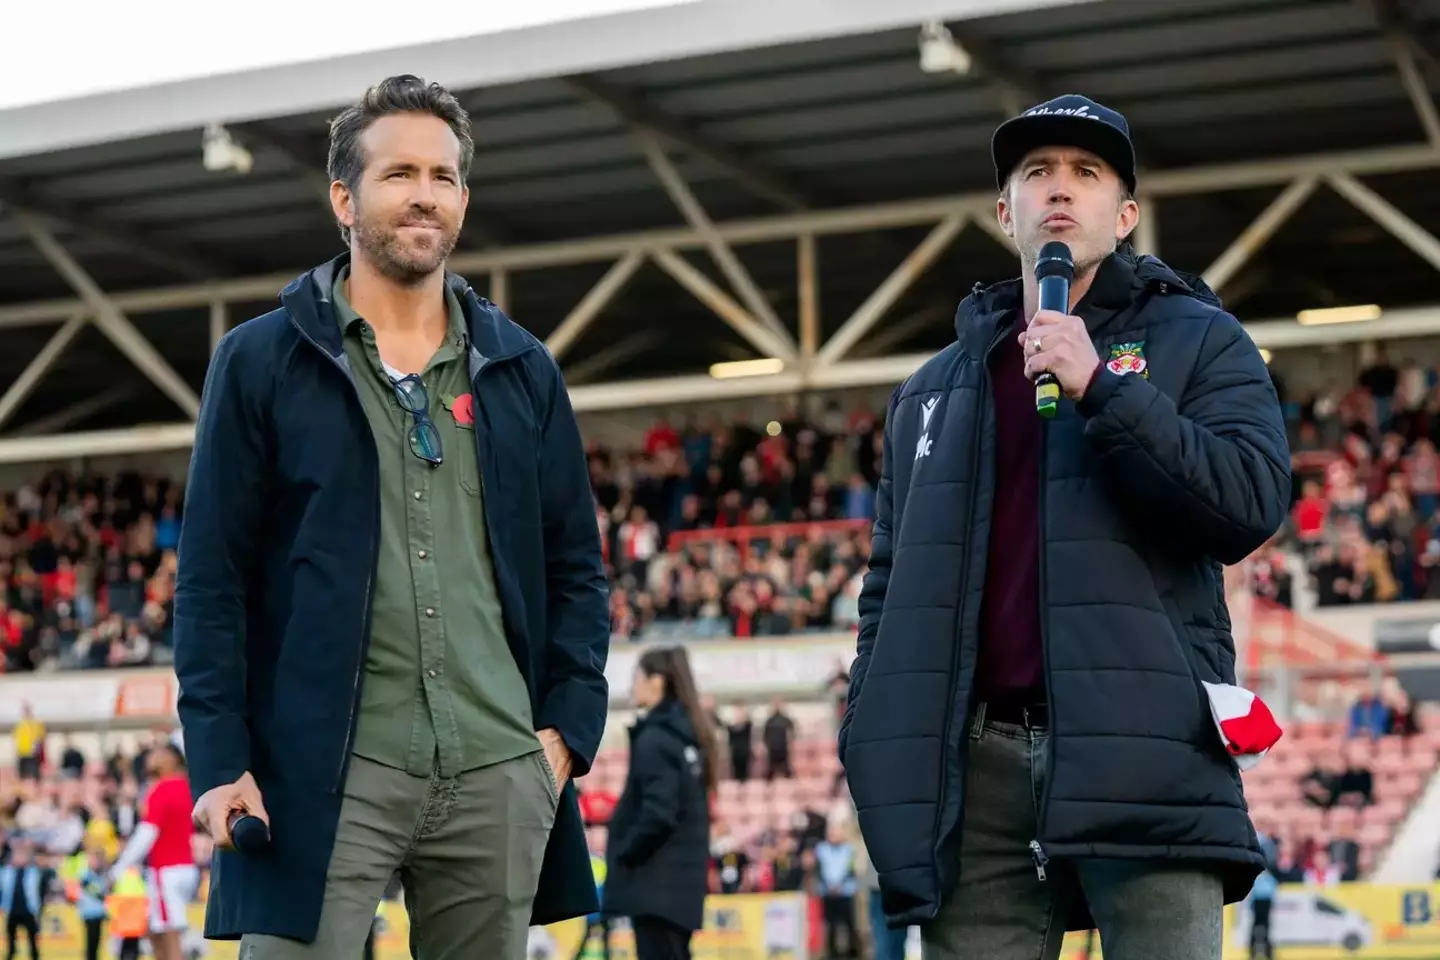 Ryan Reynolds has made a load of gruelling journeys to Wrexham and back in the past month.